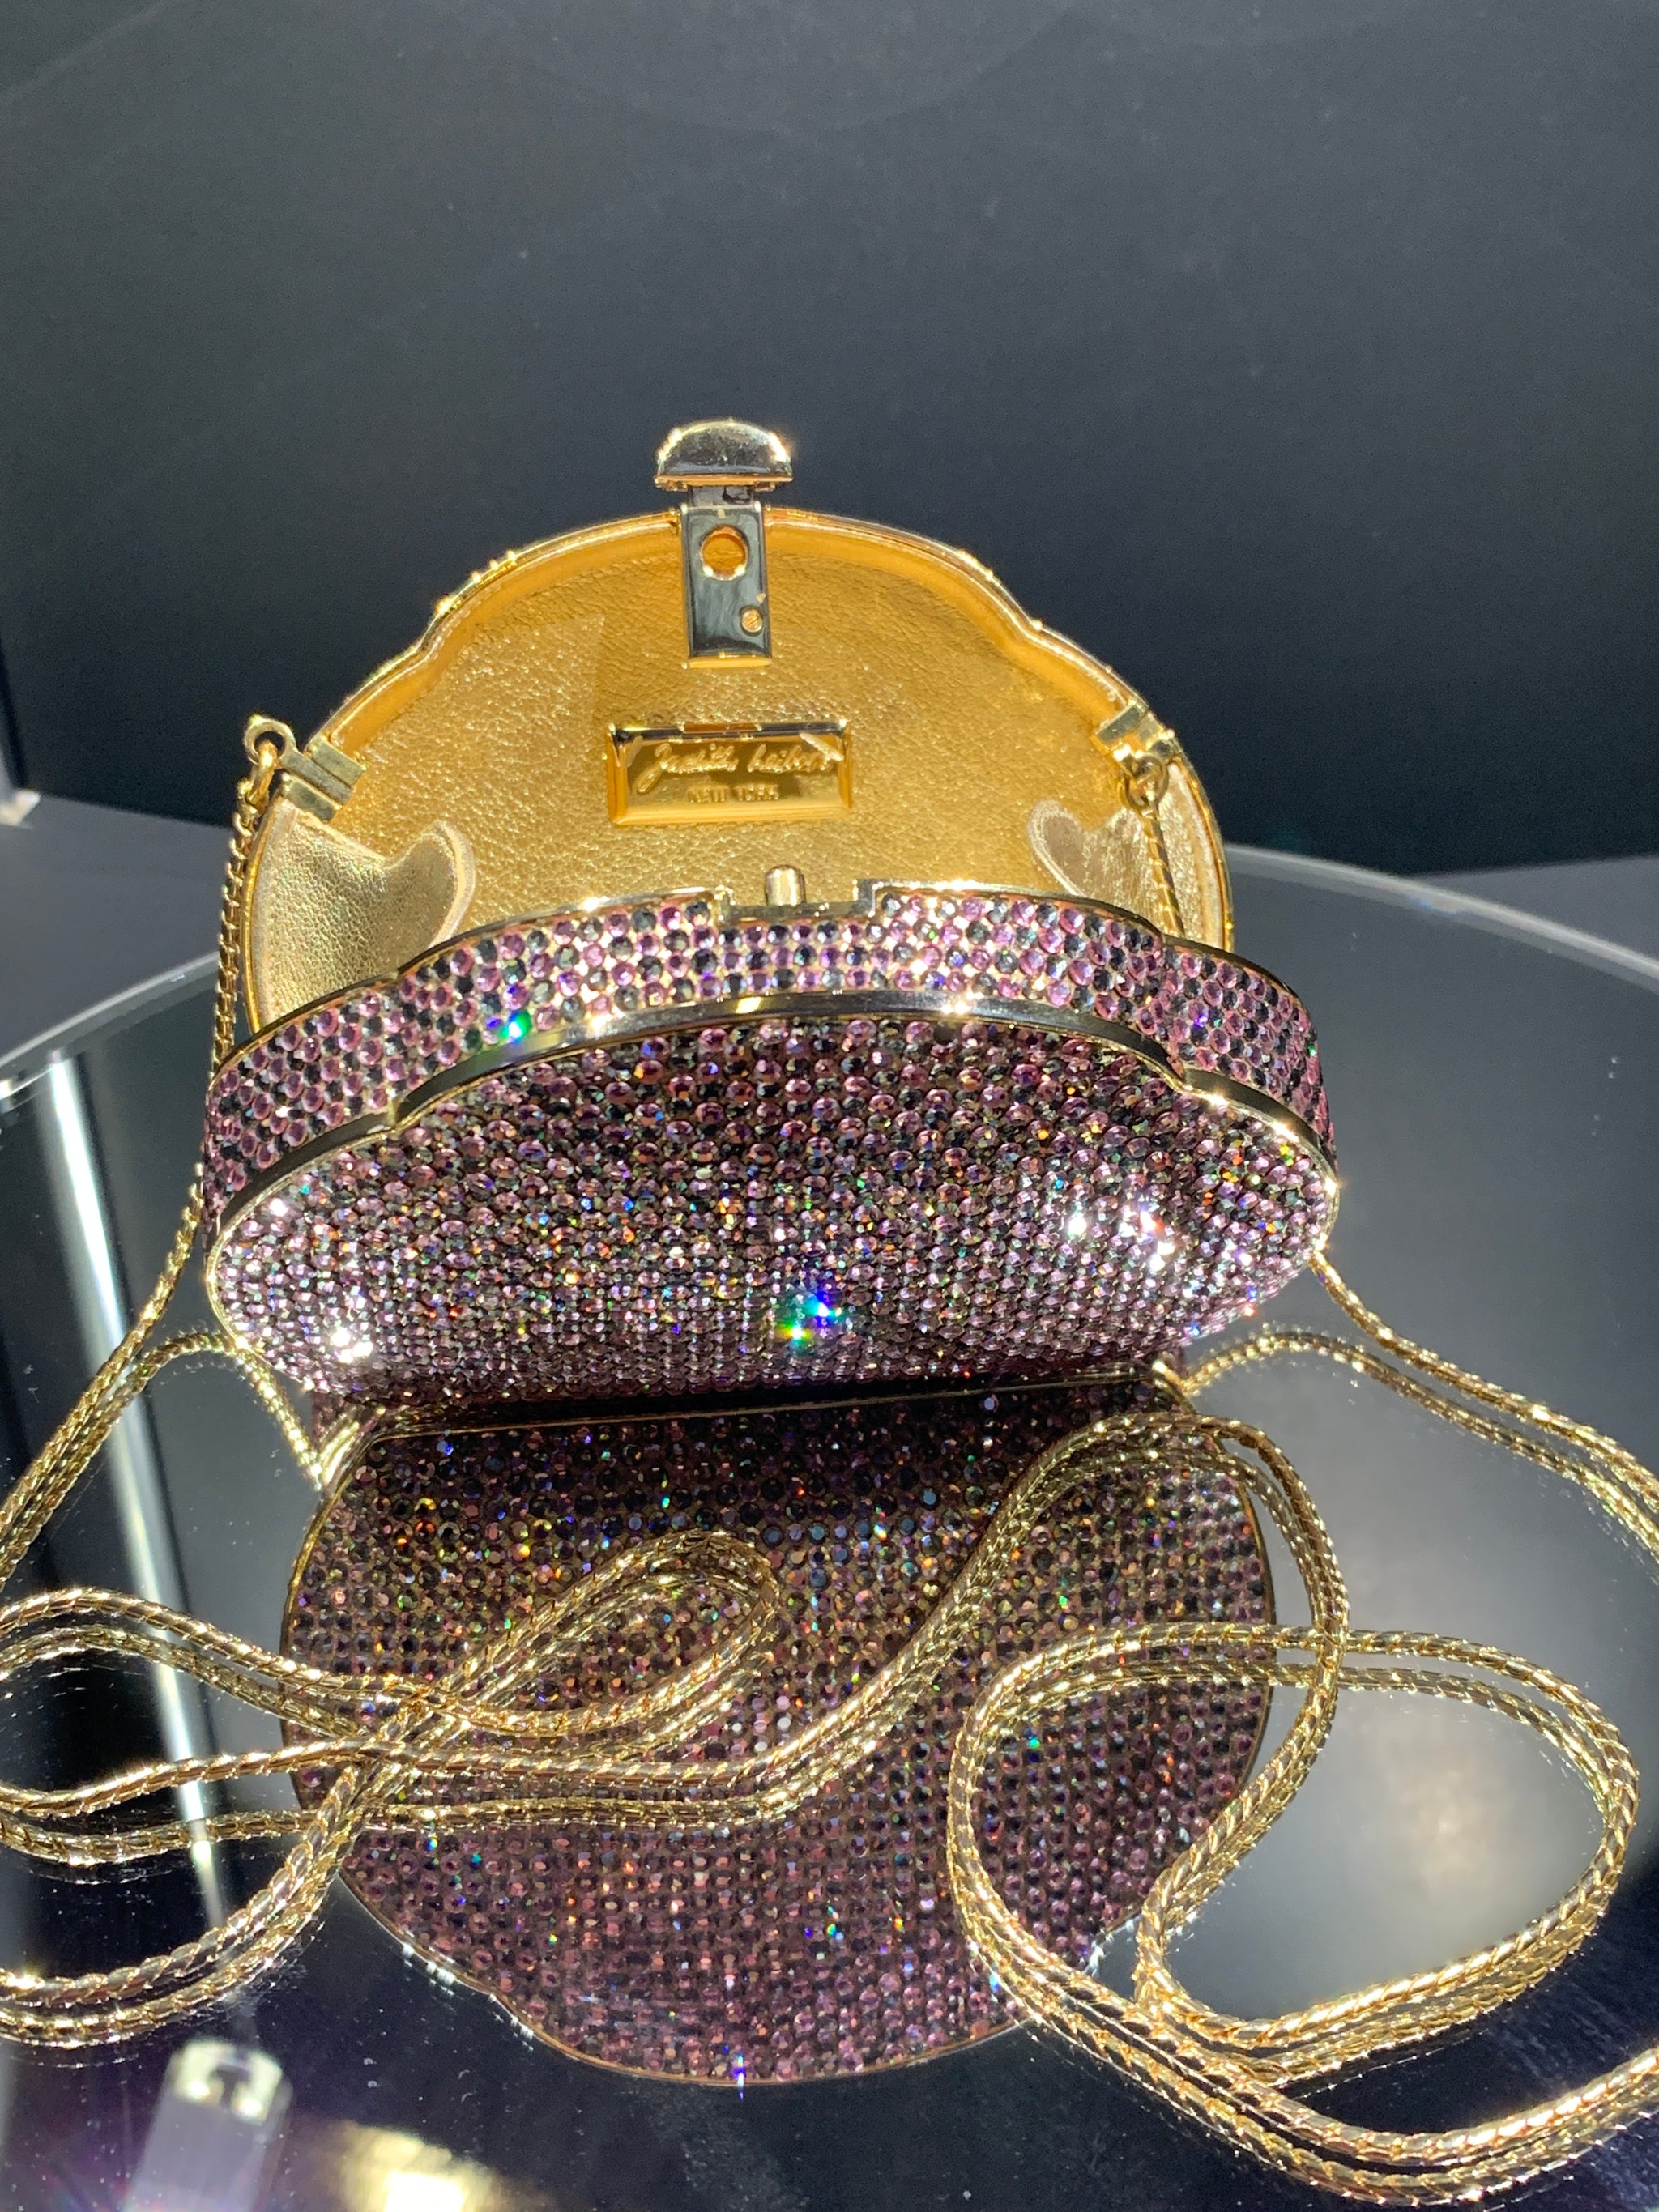 Past auction: 'Pearl' heart minaudiere, Judith Leiber